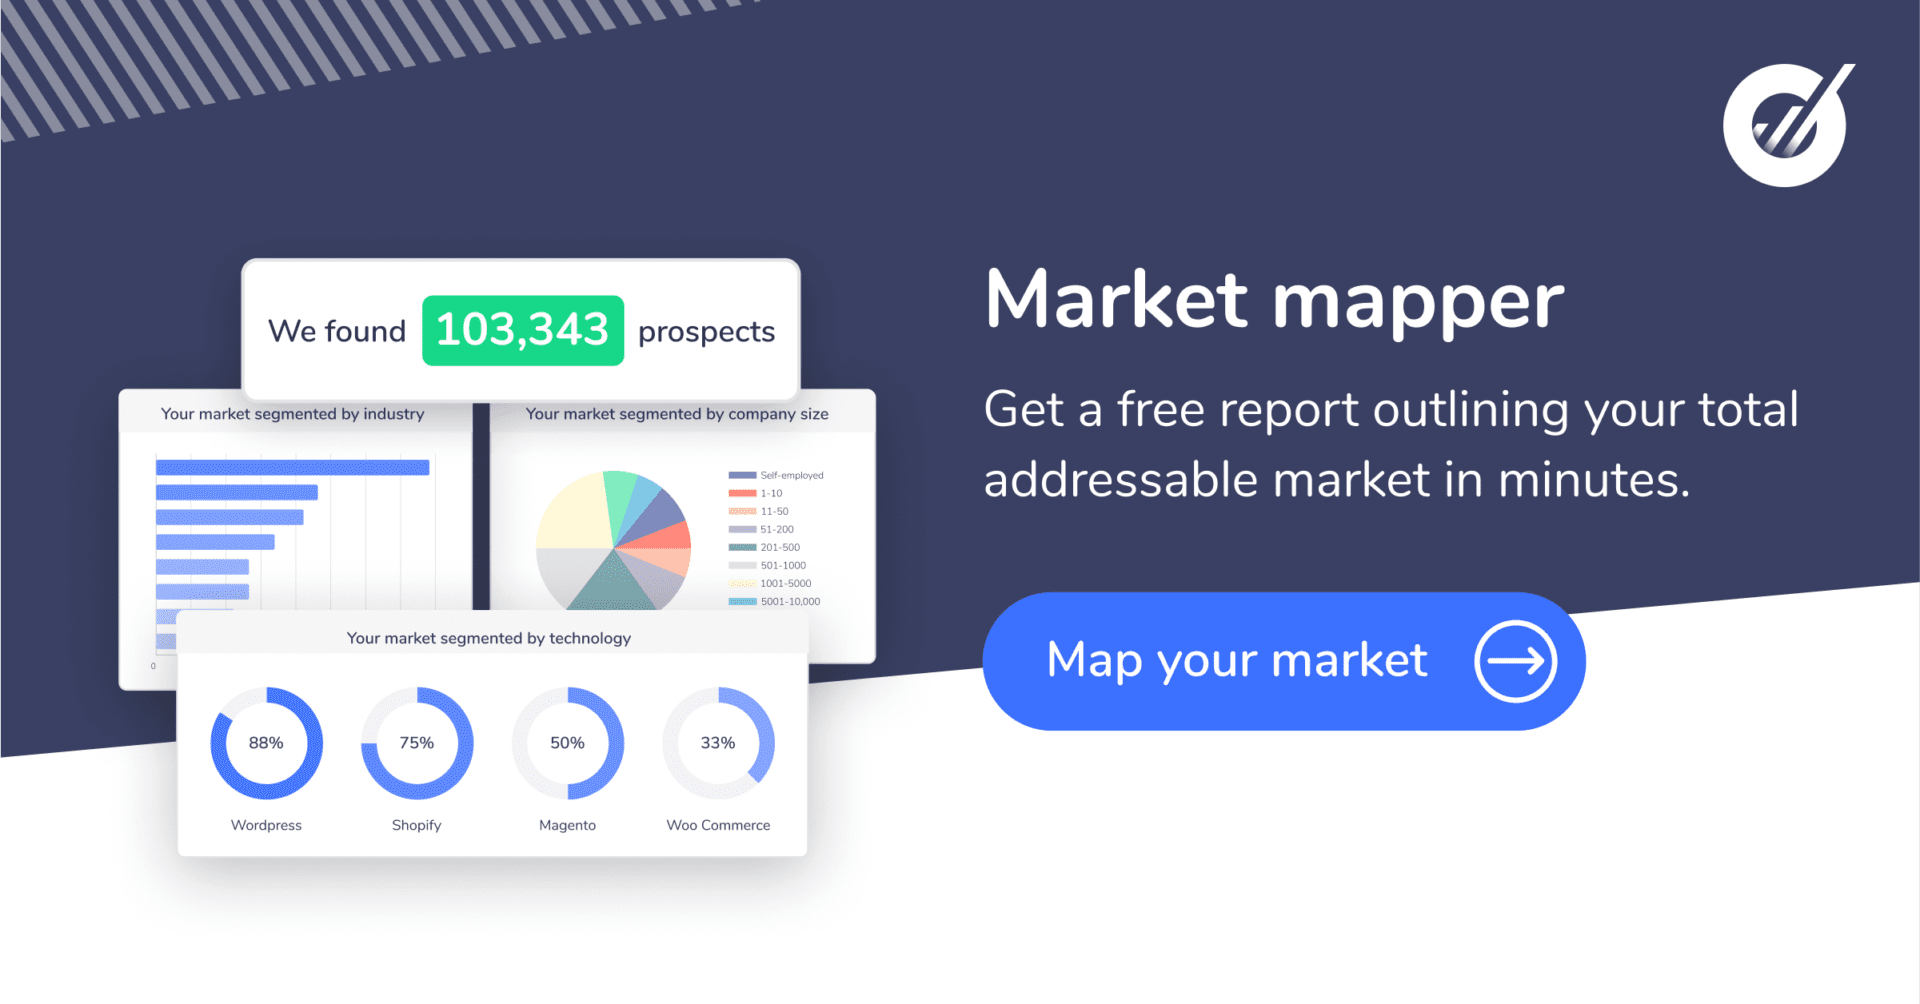 CTA image and link: For a free report outlining your total addressable market, try our market mapper tool